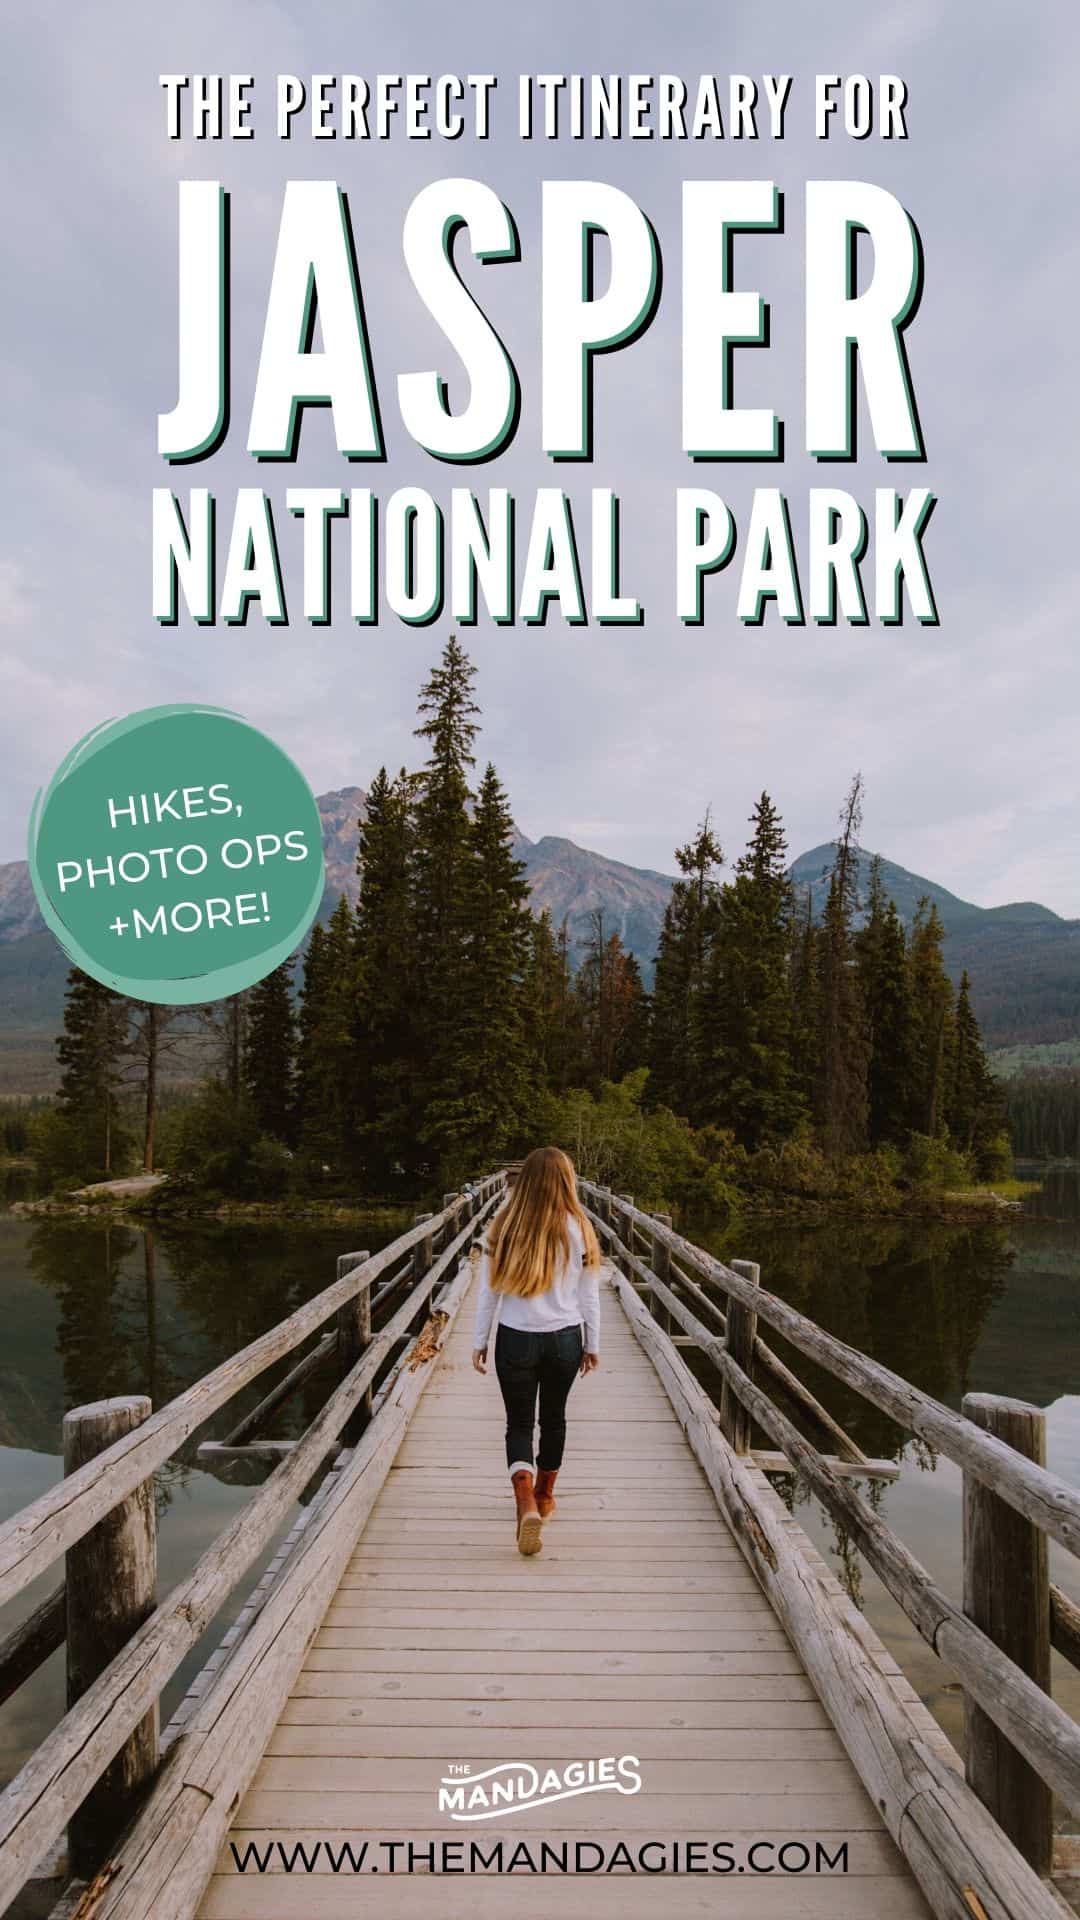 Discover the best Jasper National Park one-week itinerary here! It will take you some of the best spots in Jasper, including Athabasca Falls, Maligne Lake, Pyramid Island, and some secret spots in the Canadian Rockies! See it all here: #canadianrockies #jasper #jaspernationalpark #malignelake #pyramidlake #canada #adventure